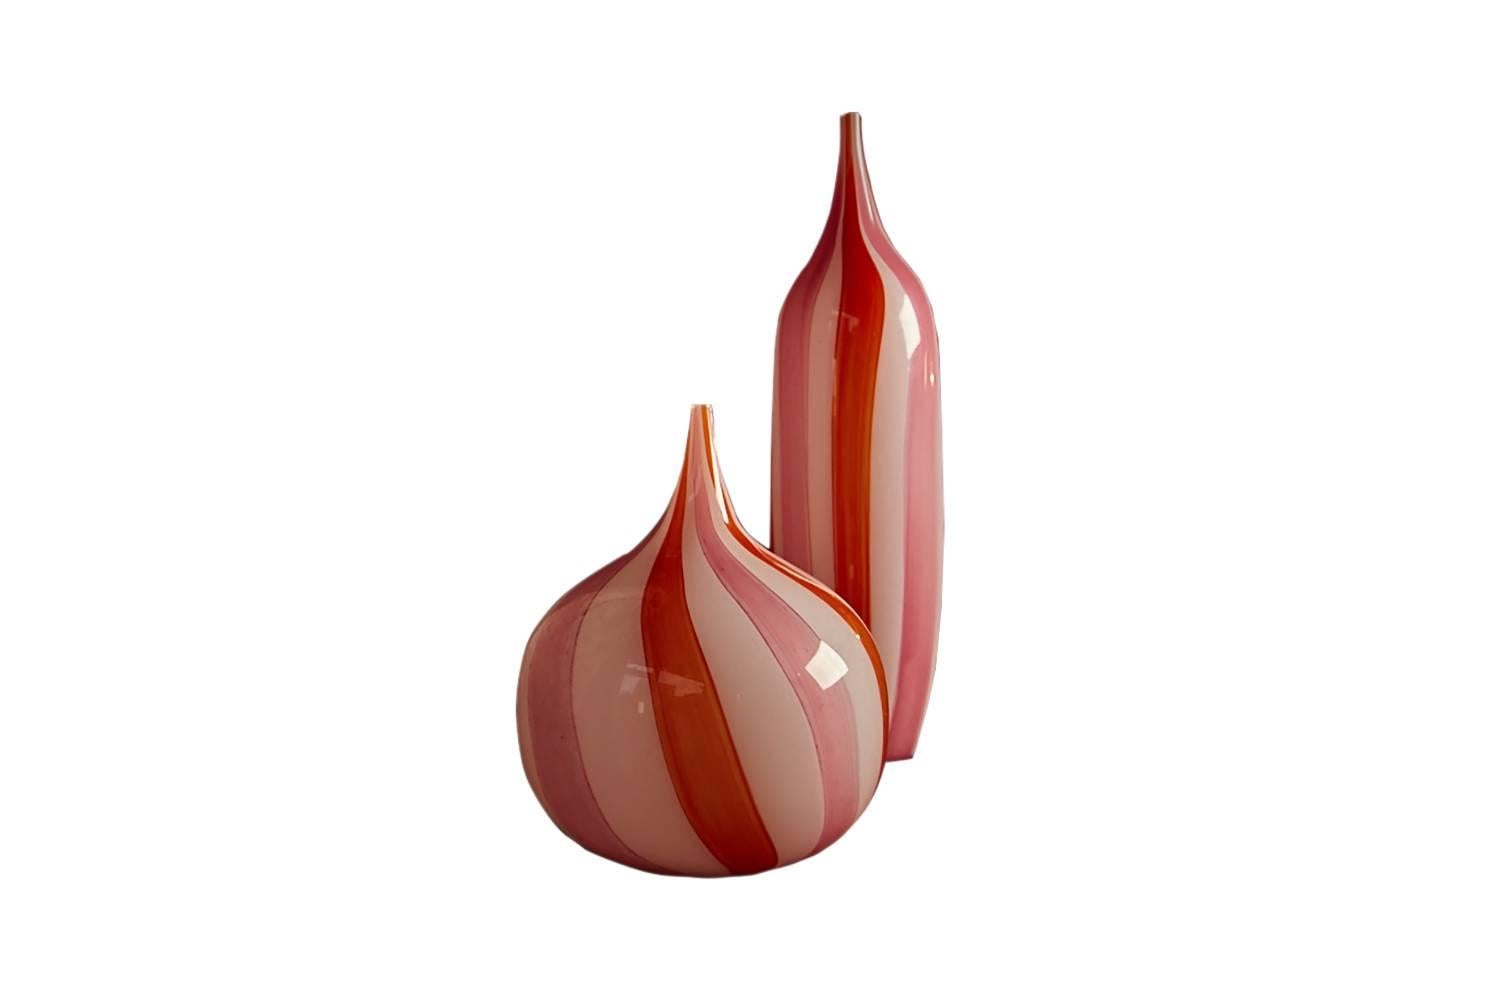 Rare to find a pair of Murano vases of this design and complimentary size. One of tall cylindrical form, the other of a characteristic round 'onion' shape. With twisted barley glaze in Vermillion, candy pink and white with a wonderful translucency.